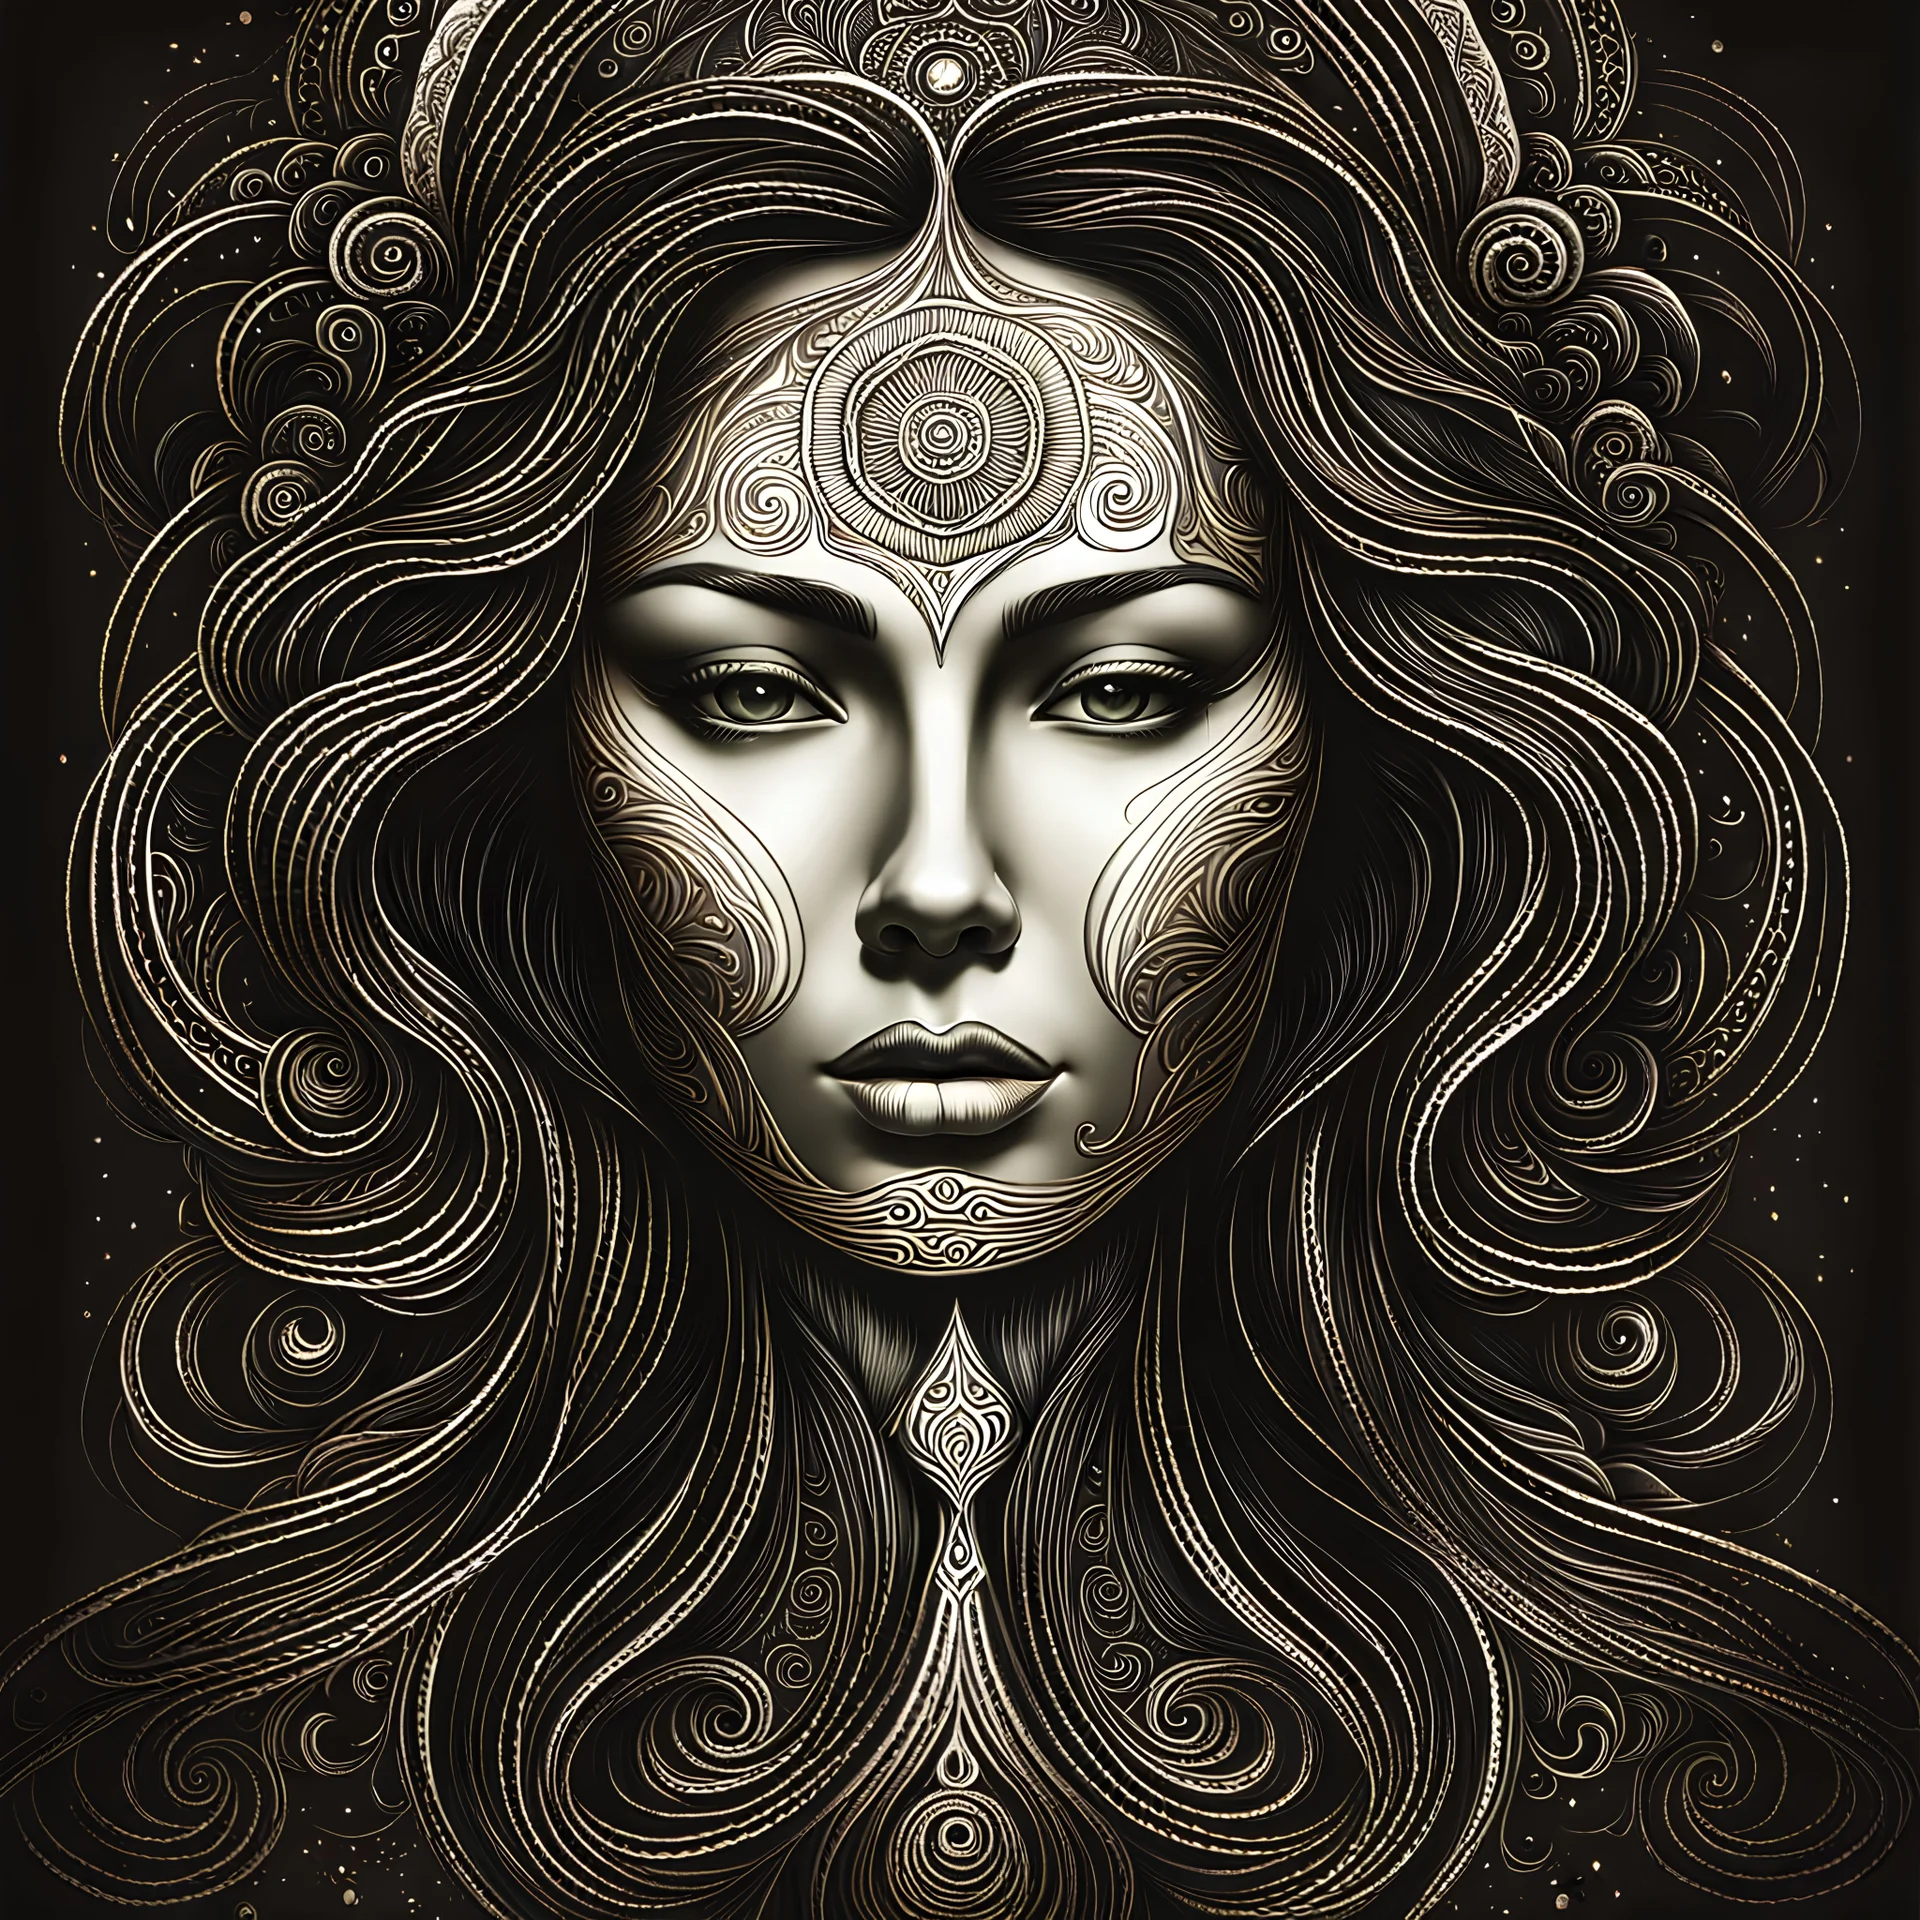 create a haunted female disembodied spirit with highly detailed, sharply lined facial features, , finely drawn, boldly inked, in dark ethereal colors, otherworldly, celestial, and beautiful